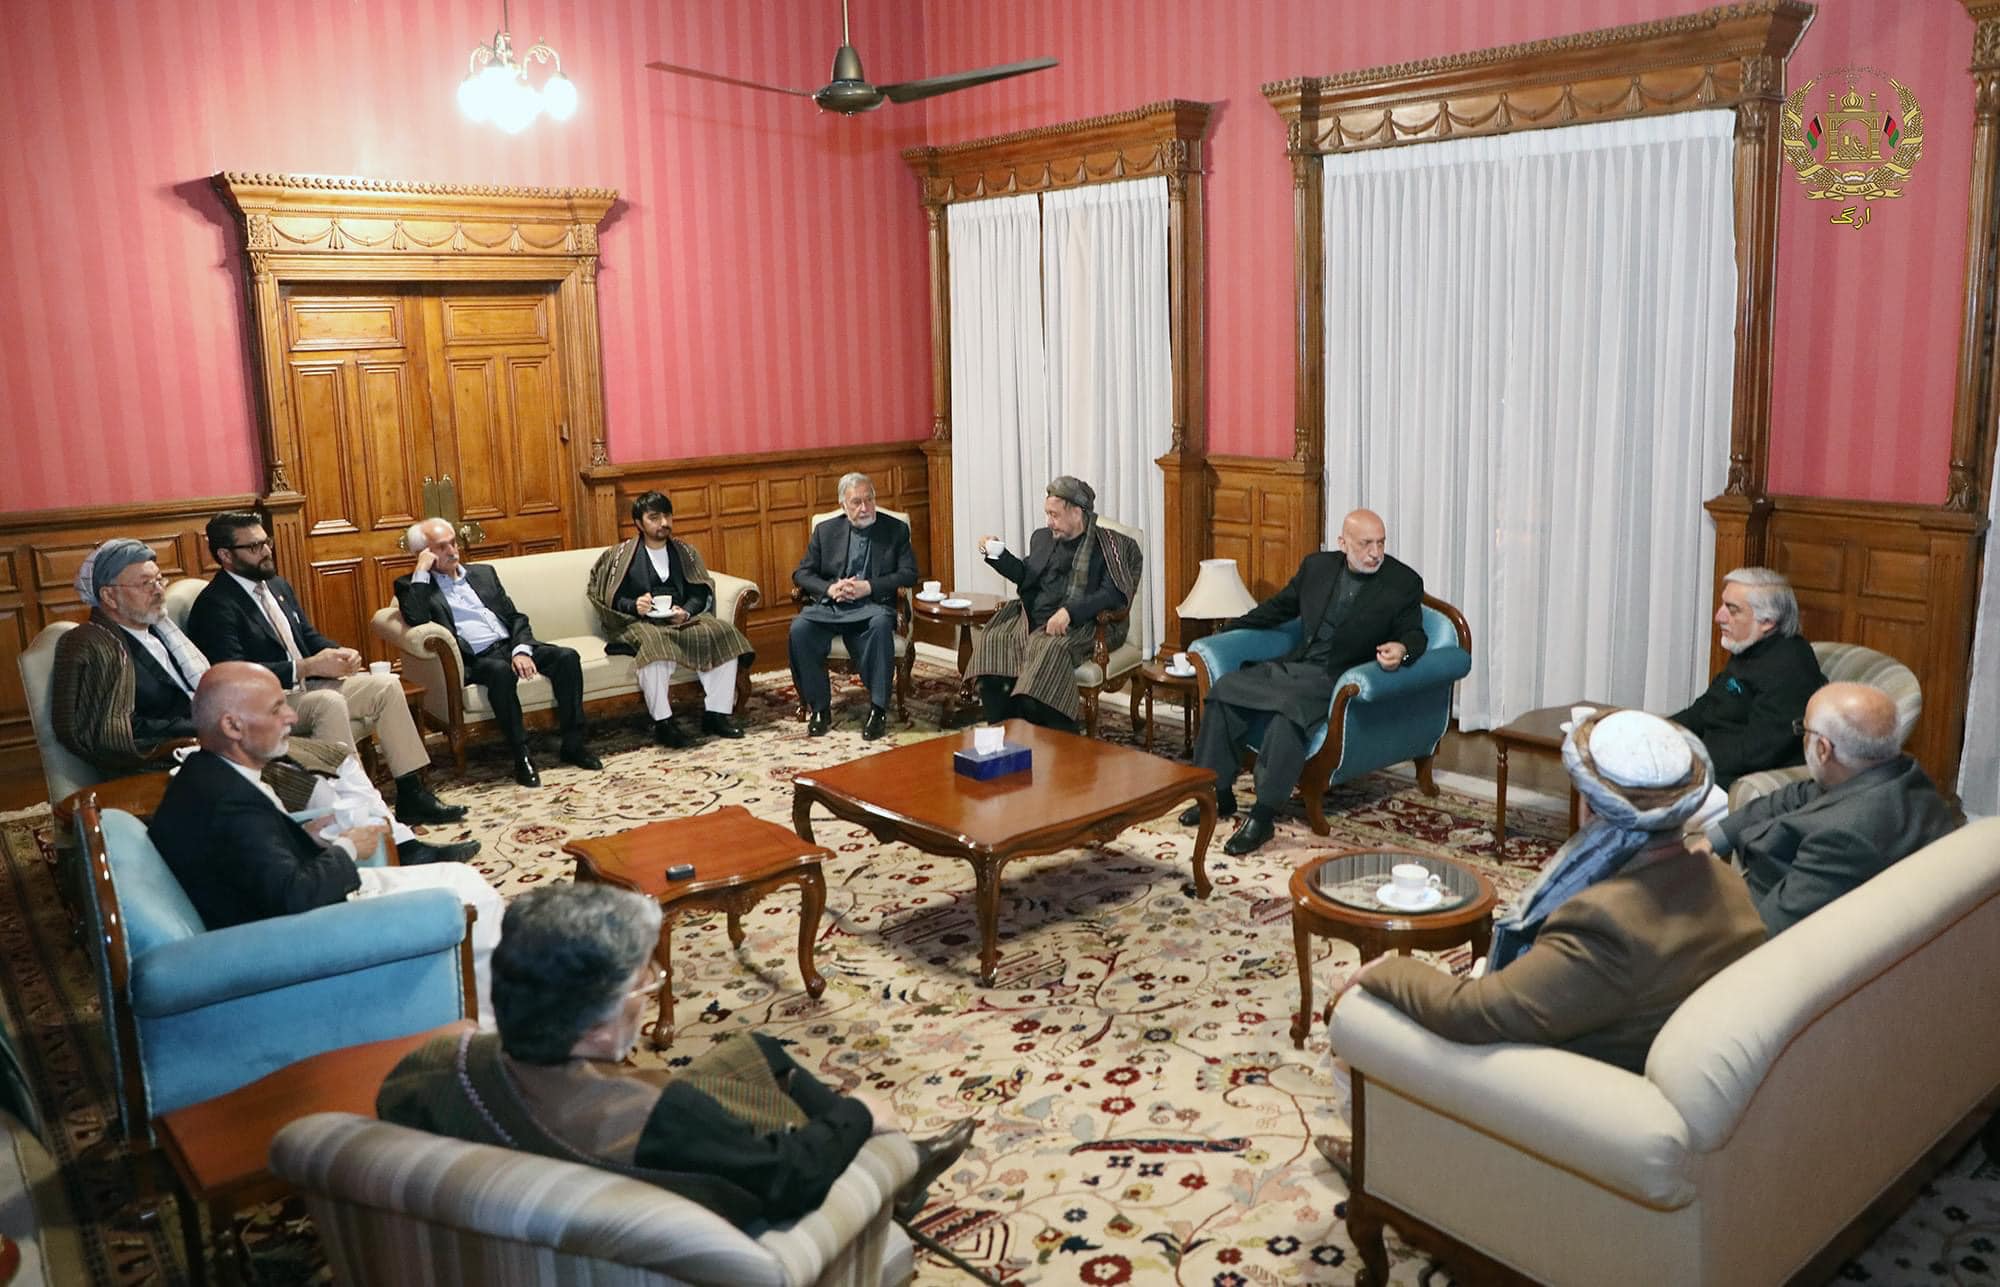 This comes a week after recent meetings of prominent Afghan political leaders were held without the presence of women, which has sparked reactions from activists who said women should be given a role in decision-making about the future of the country.